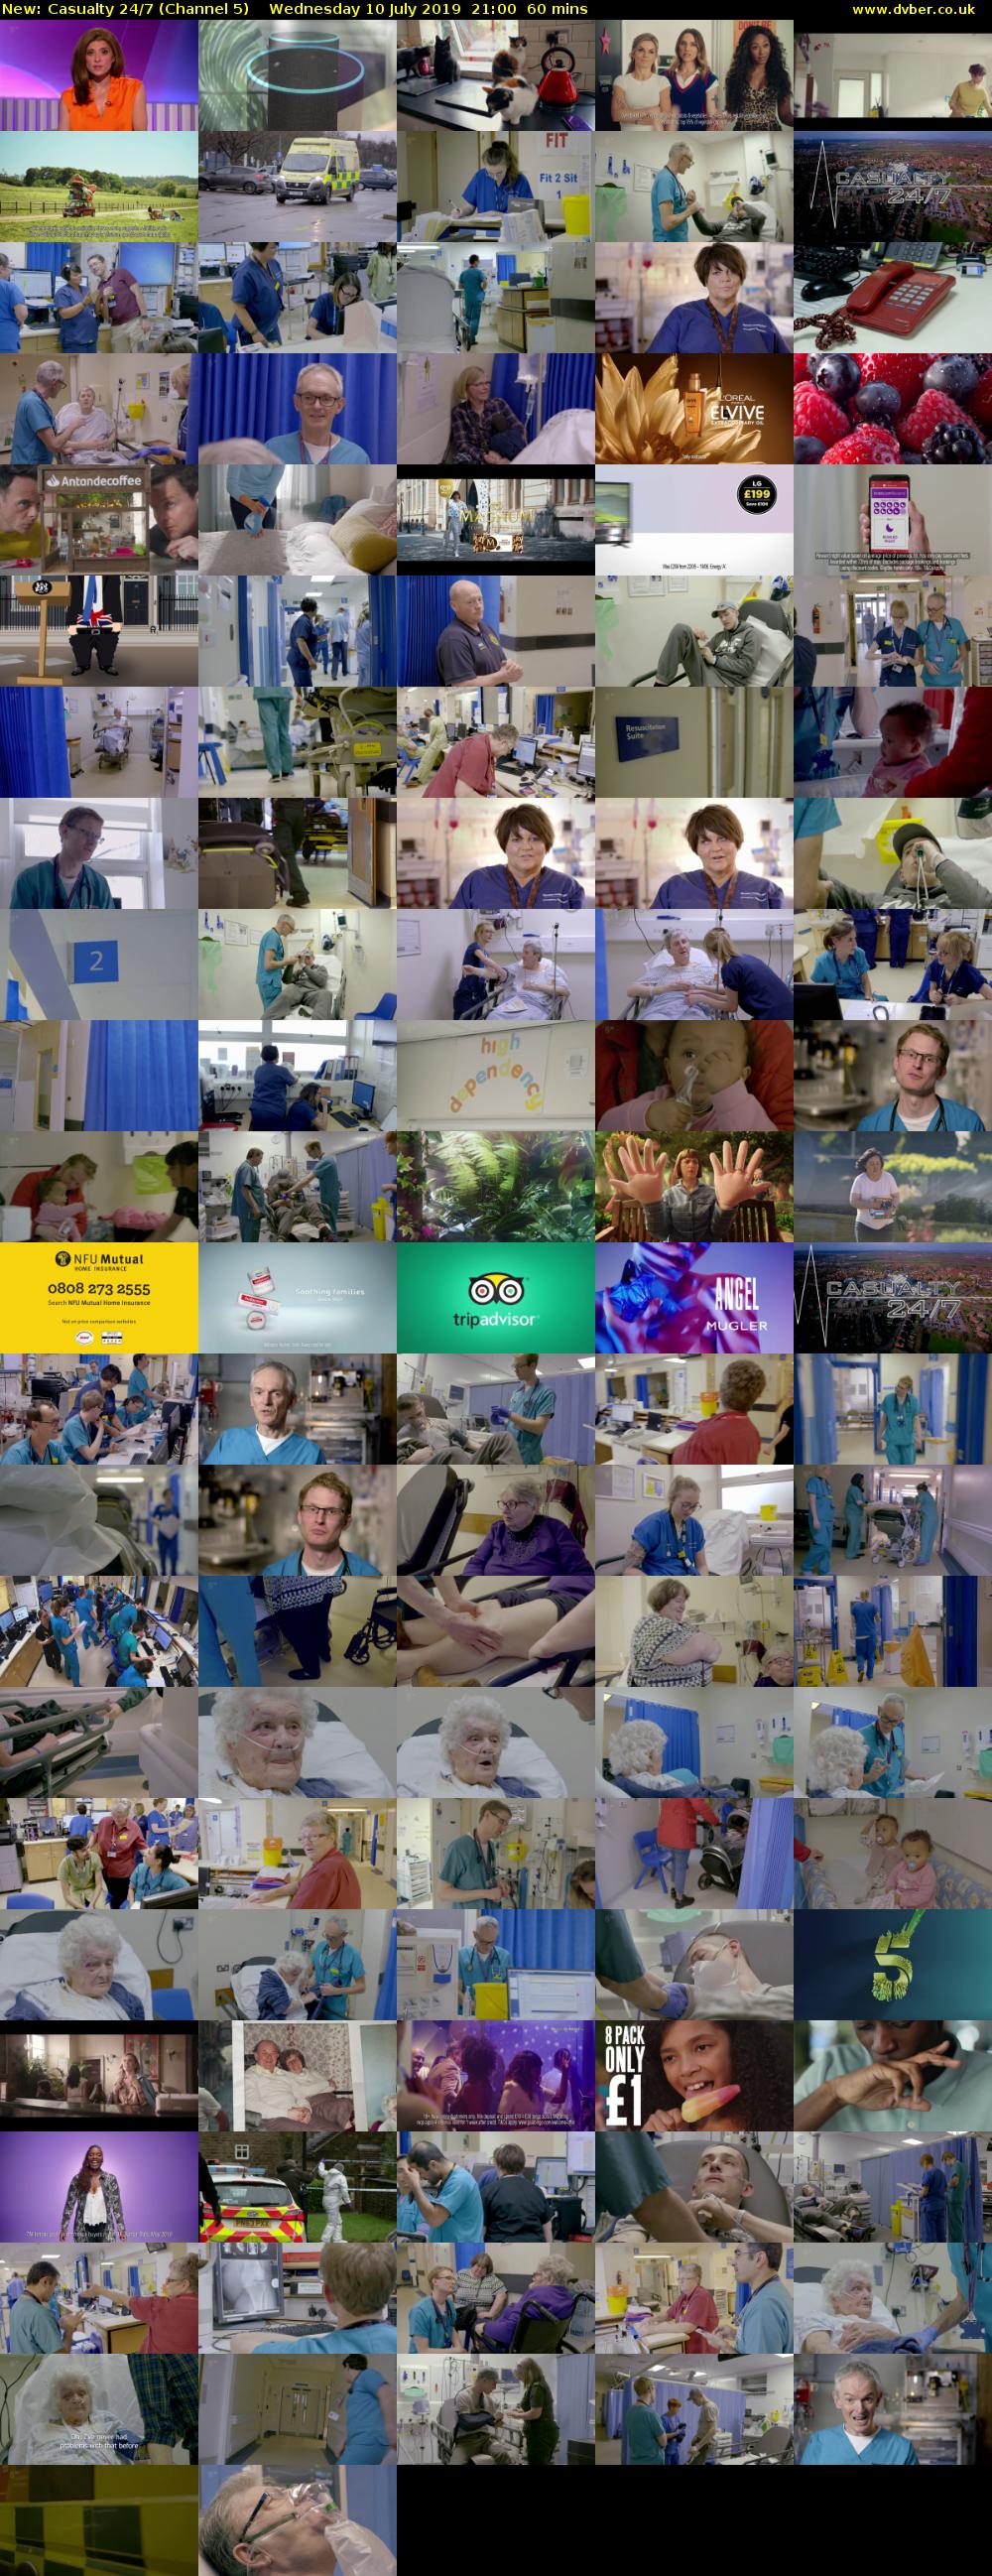 Casualty 24/7 (Channel 5) Wednesday 10 July 2019 21:00 - 22:00